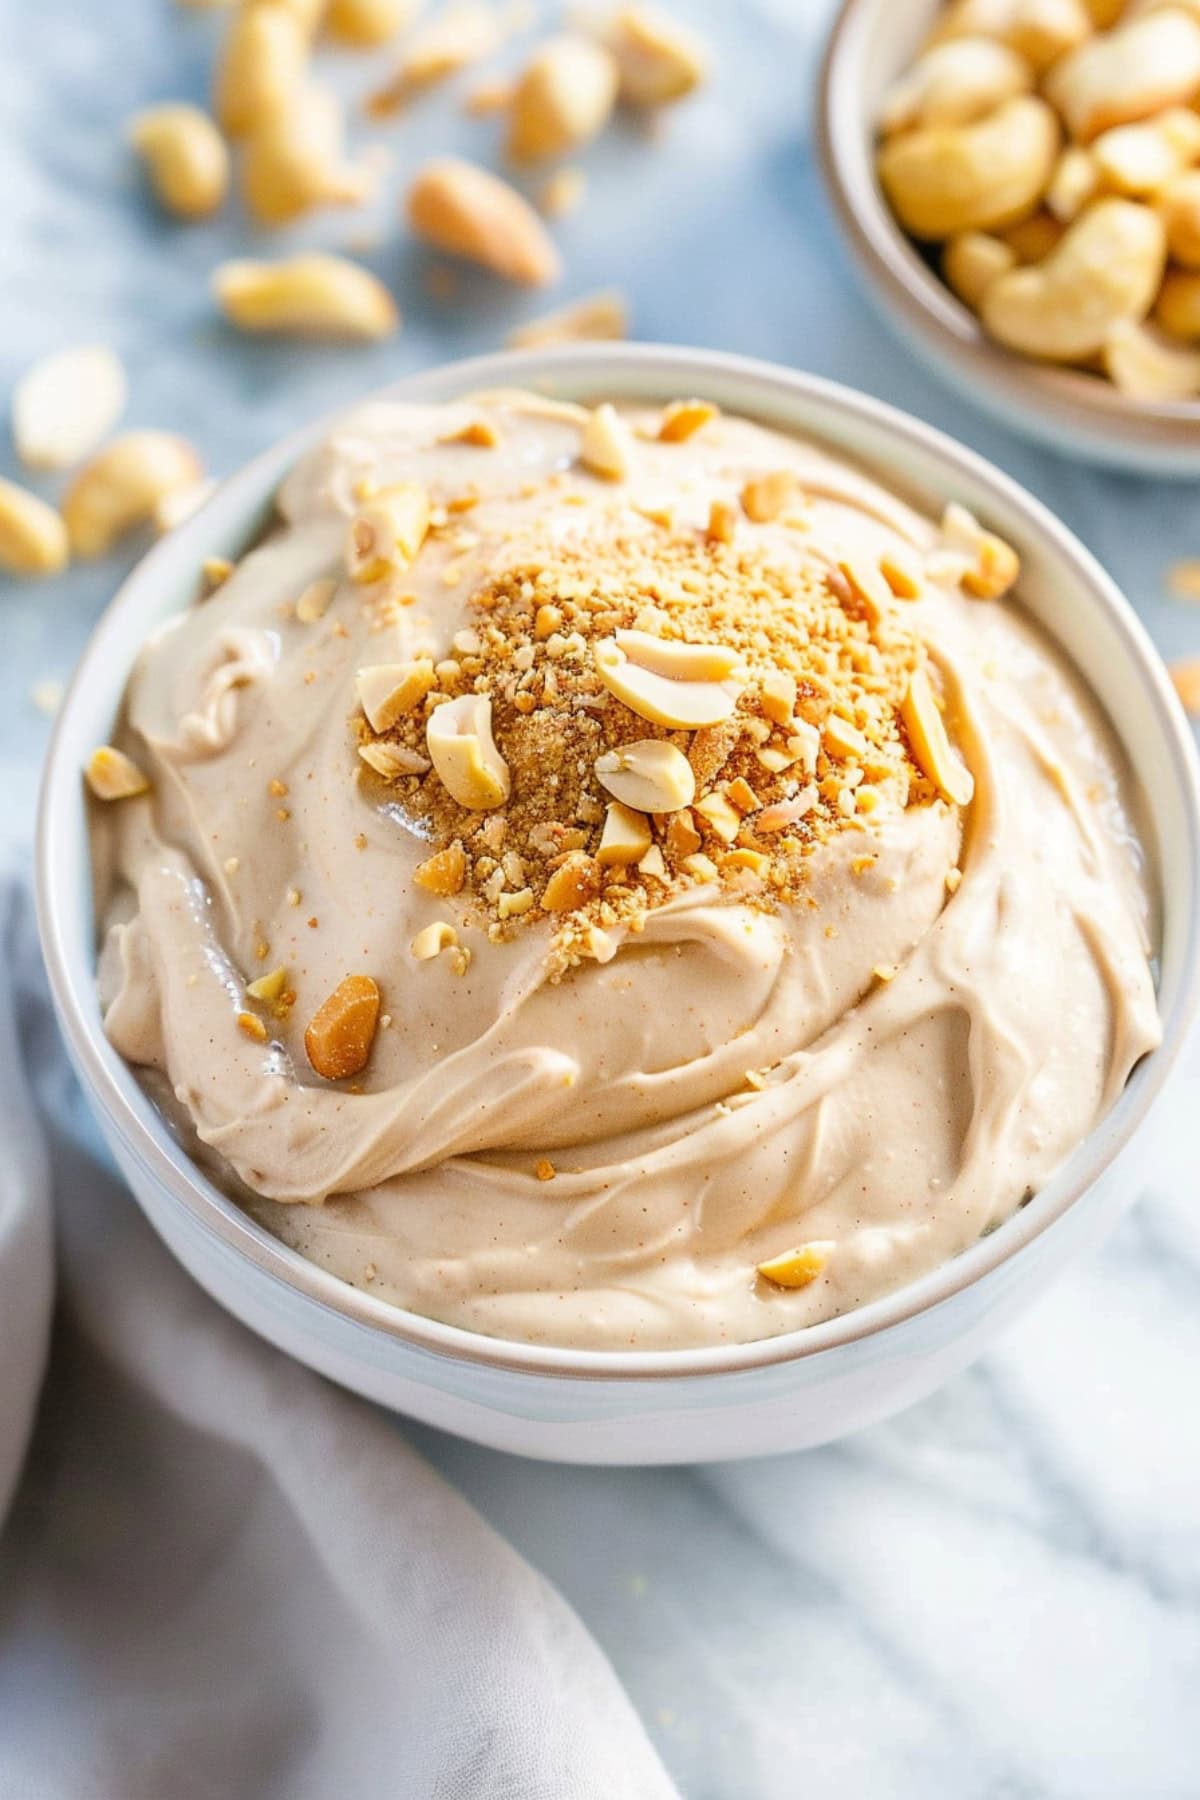 Creamy and fluffy peanut butter dip in a white bowl.